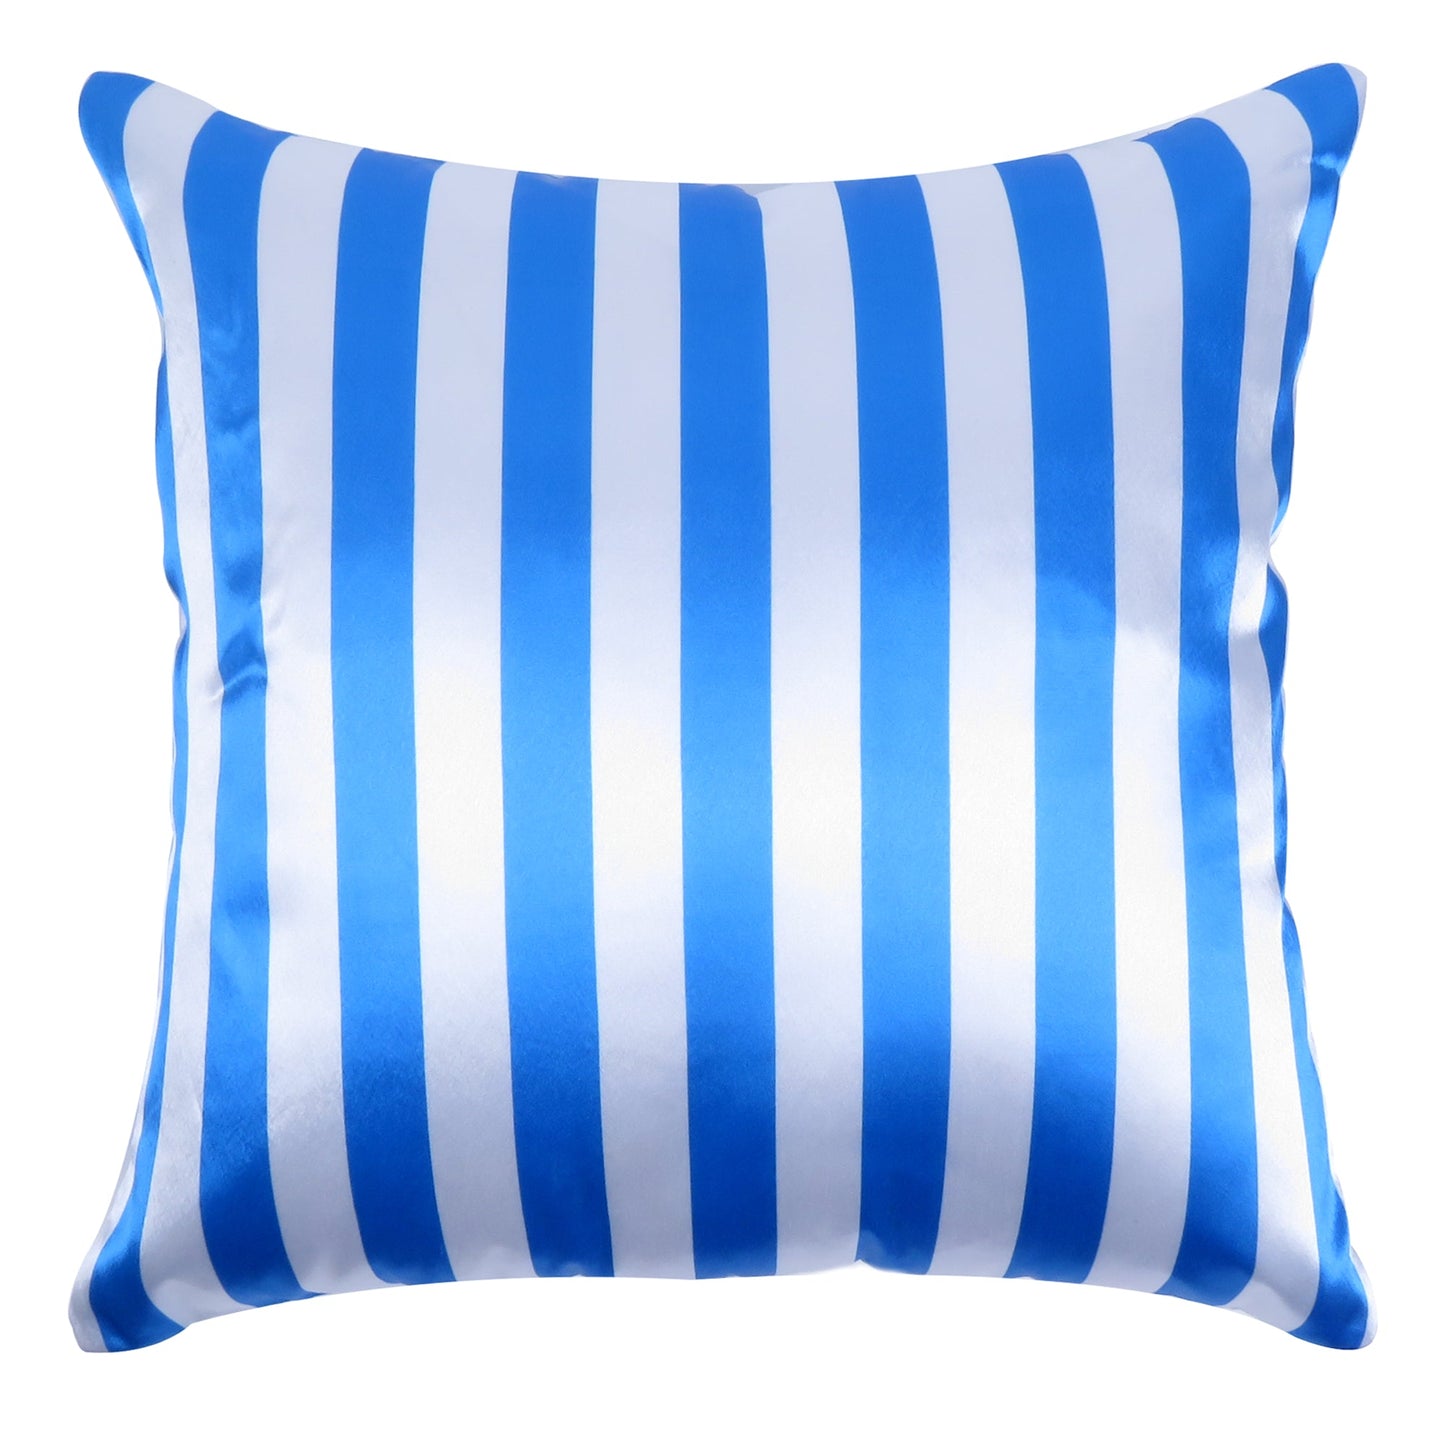 Blue Silky Striped Satin Silk Cushion Covers in Set of 2